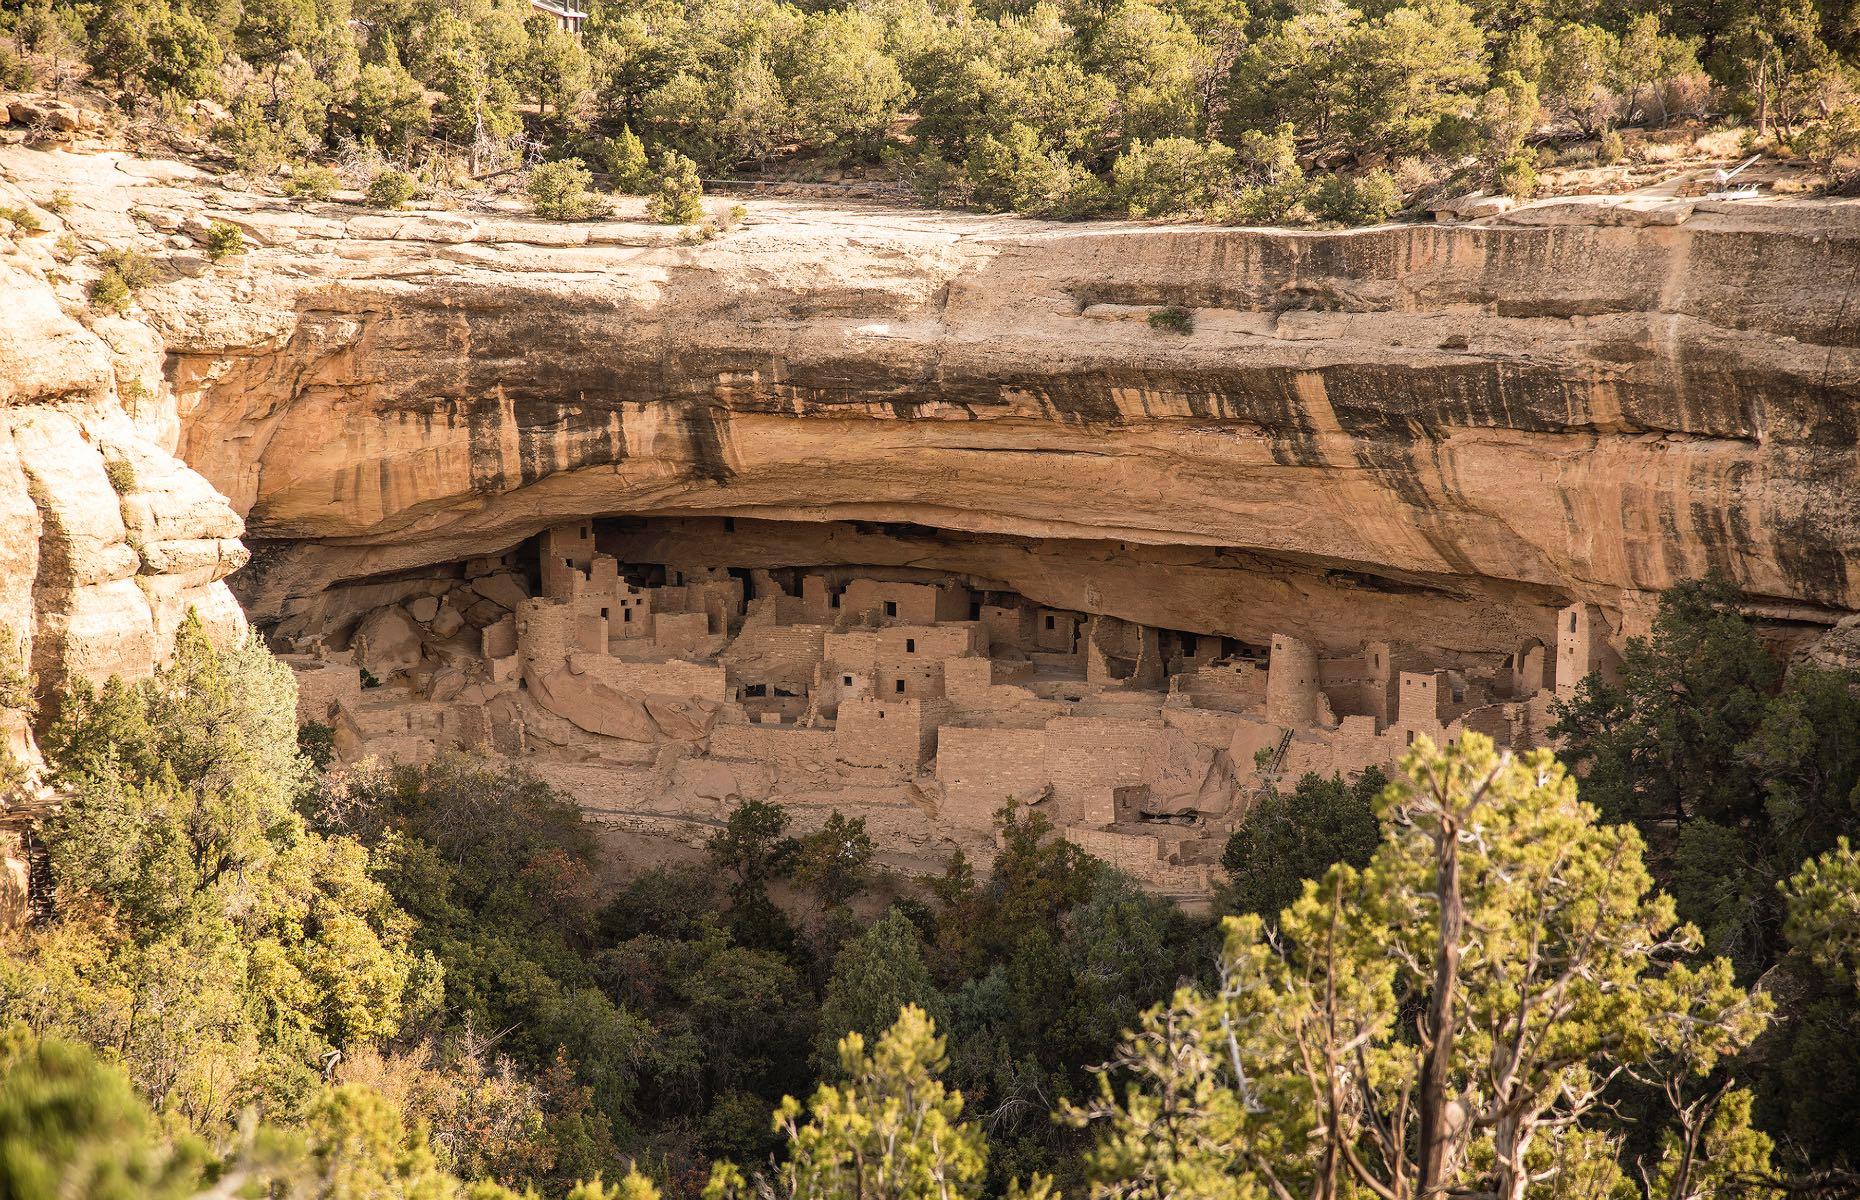 <p>No one is sure exactly how big each dwelling at Mesa Verde National Park once was. However, recent studies have revealed that the Cliff Palace (pictured) was the largest with 150 rooms, 23 kivas (congregational spaces used for ceremonies) and a population of 100. Long House is only slightly smaller, with 150 rooms and 21 kivas, while Spruce Tree House is thought to be the third largest with 130 rooms and eight kivas. </p>